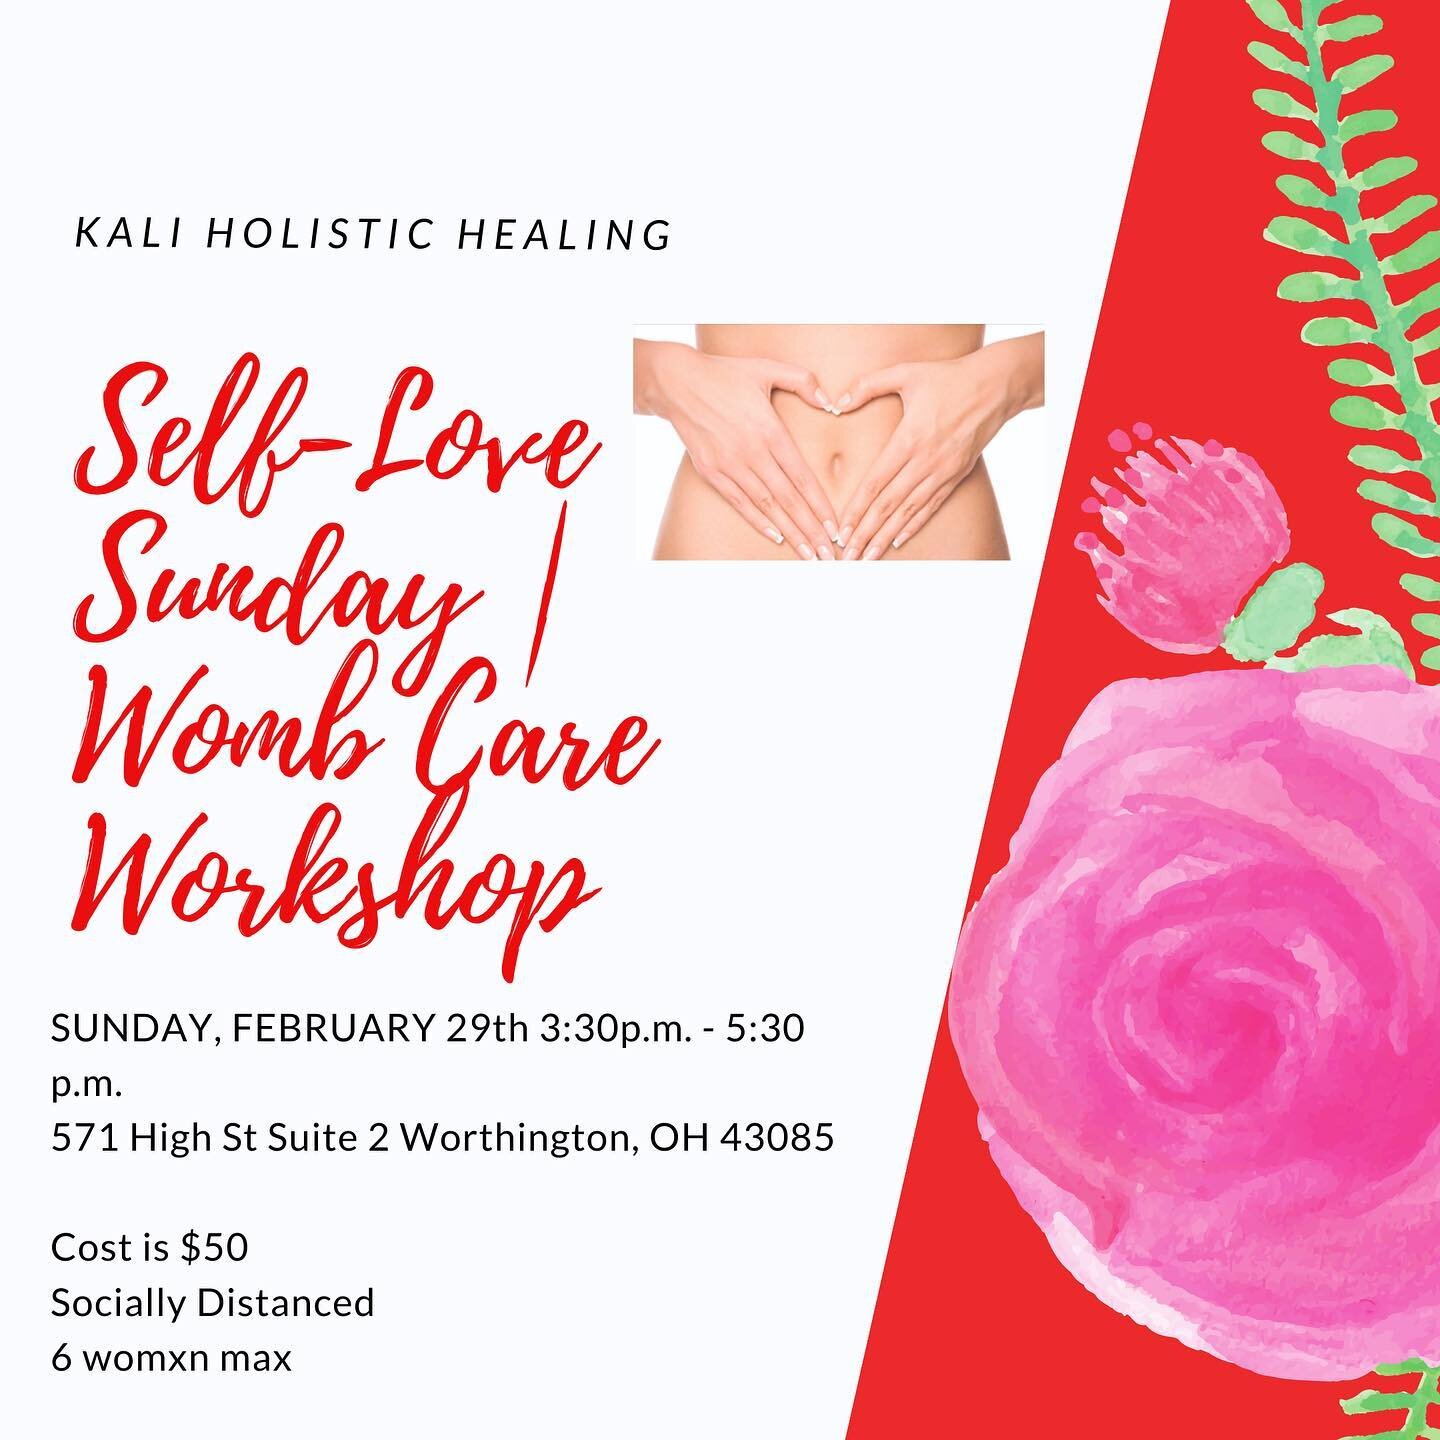 At this workshop, you will learn all about the ancient tradition of Yoni Steaming🌸. 

Yoni is the Sanskrit word for womb. With roots in many different cultures, this practice is becoming more and more well-known in our modern day world.

There are s